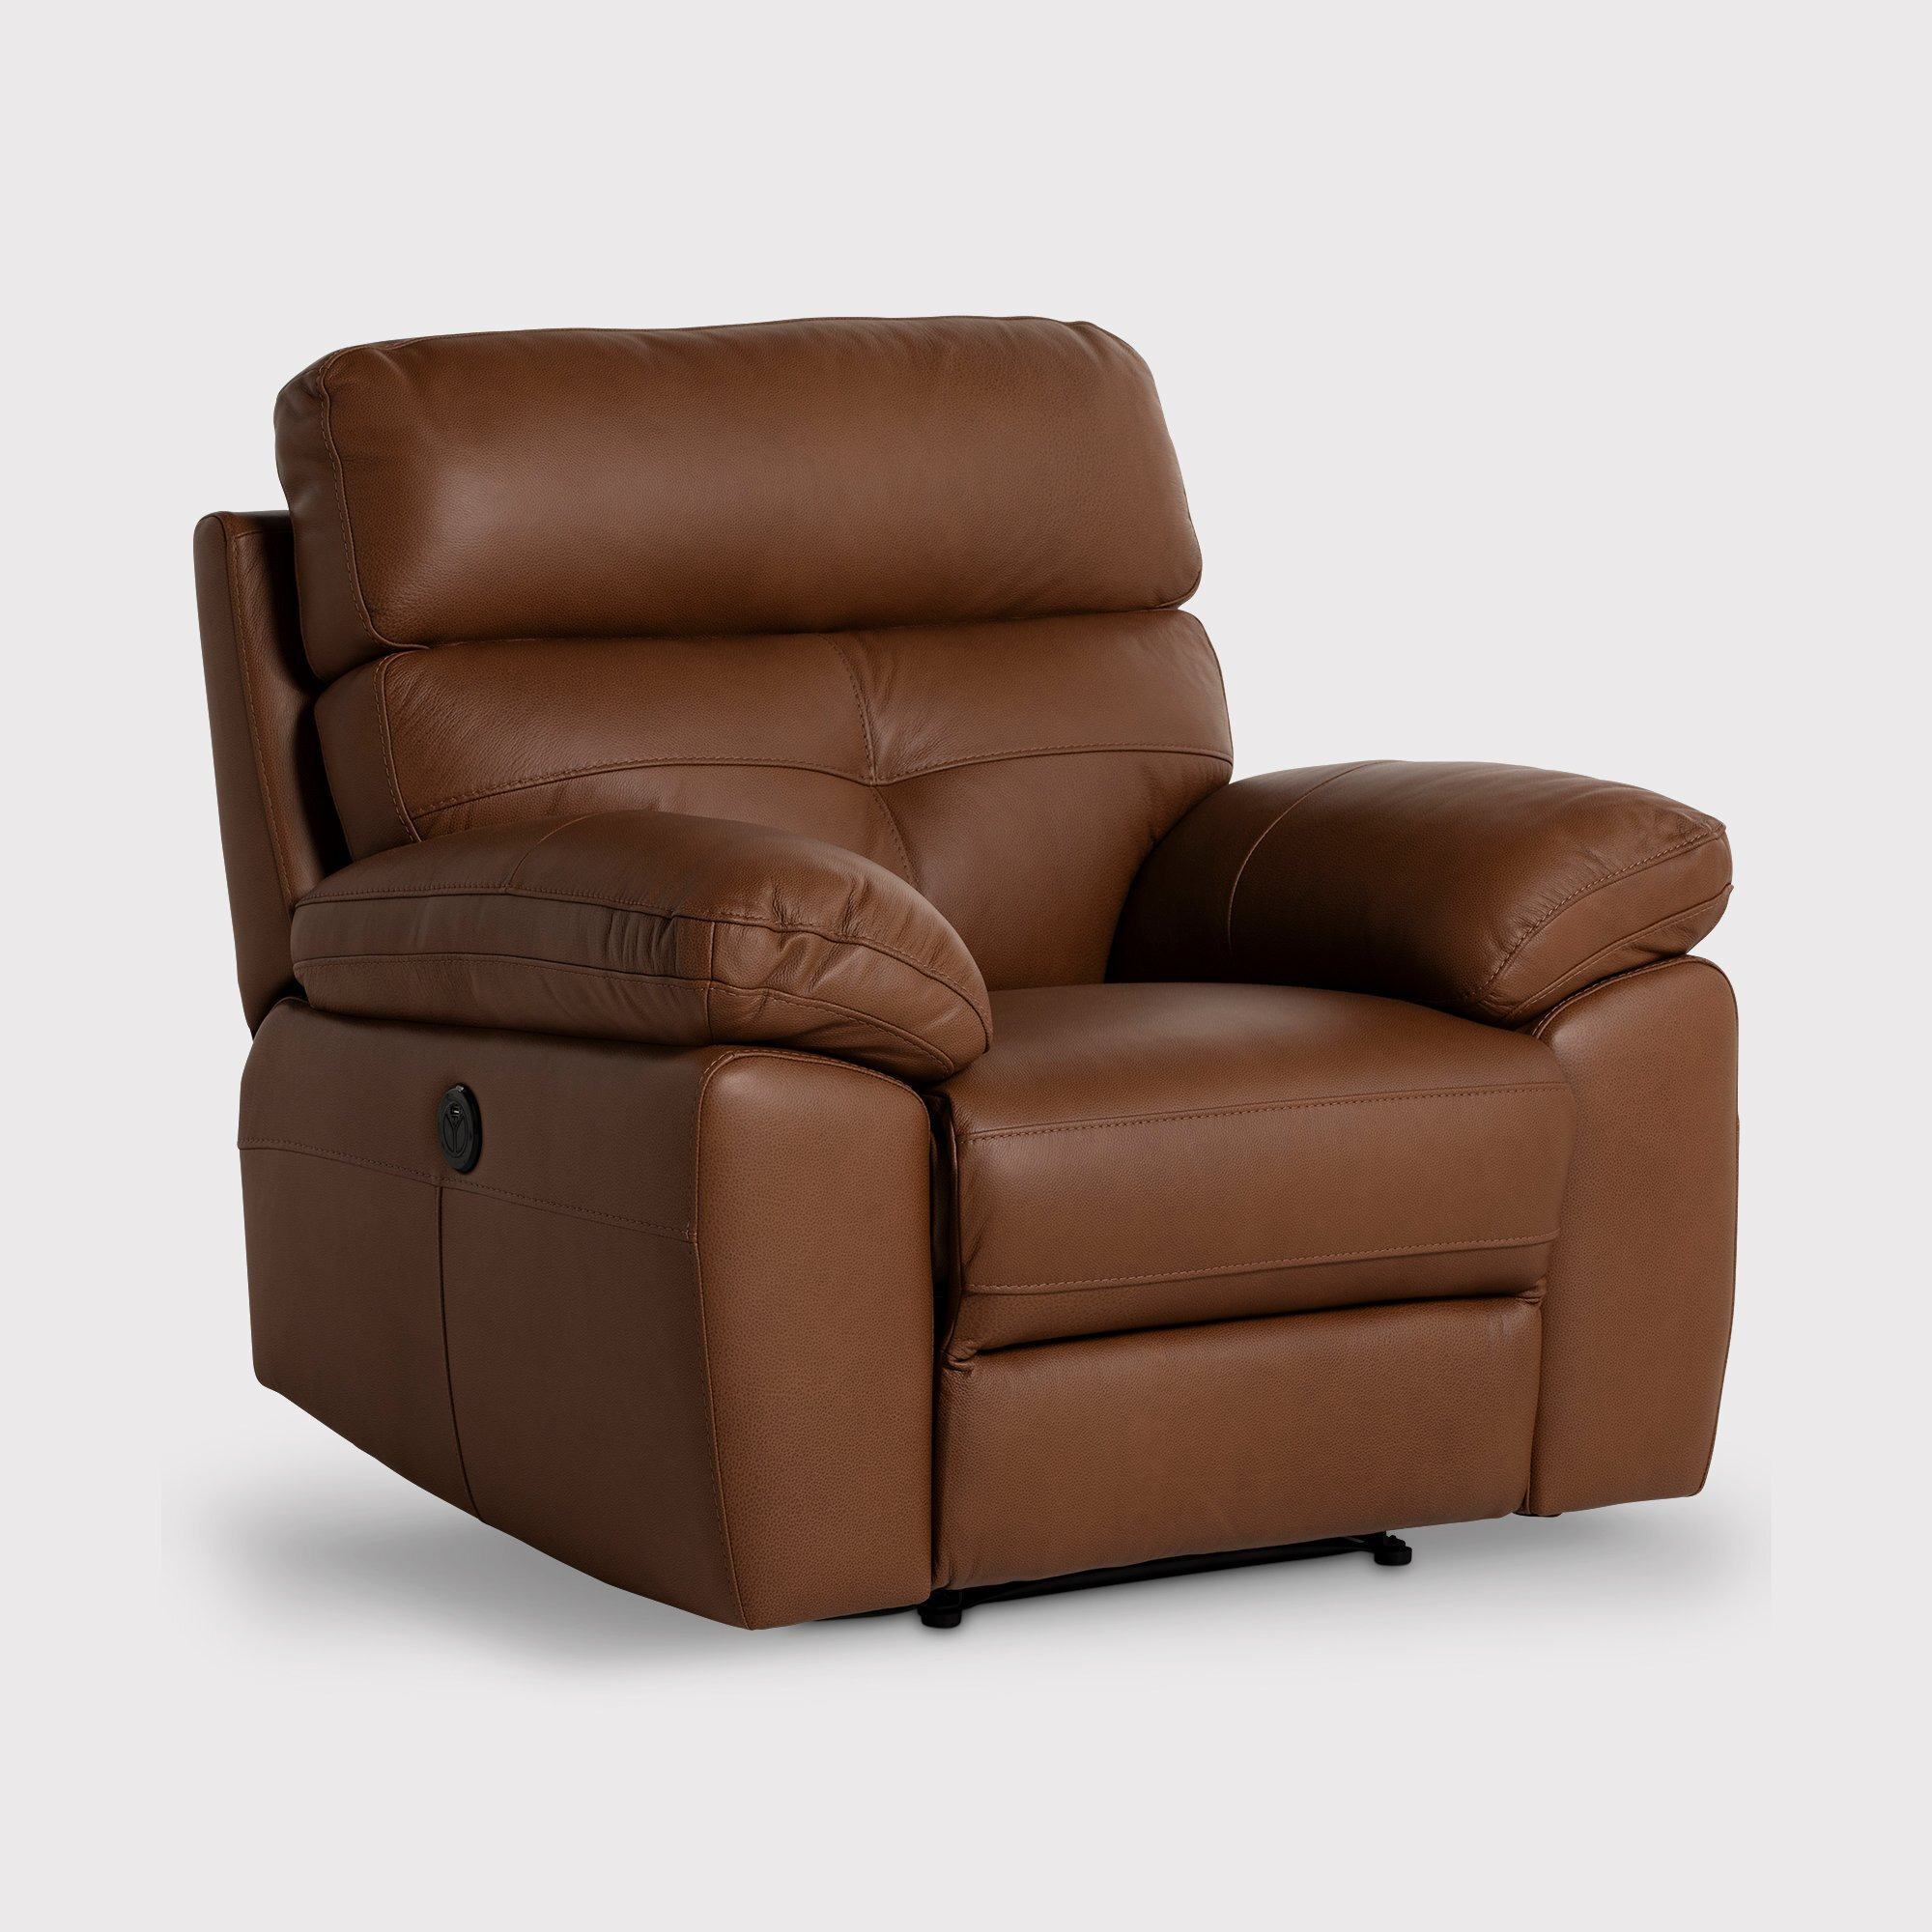 Holborn Power Recliner Armchair, Brown Leather - Barker & Stonehouse - image 1